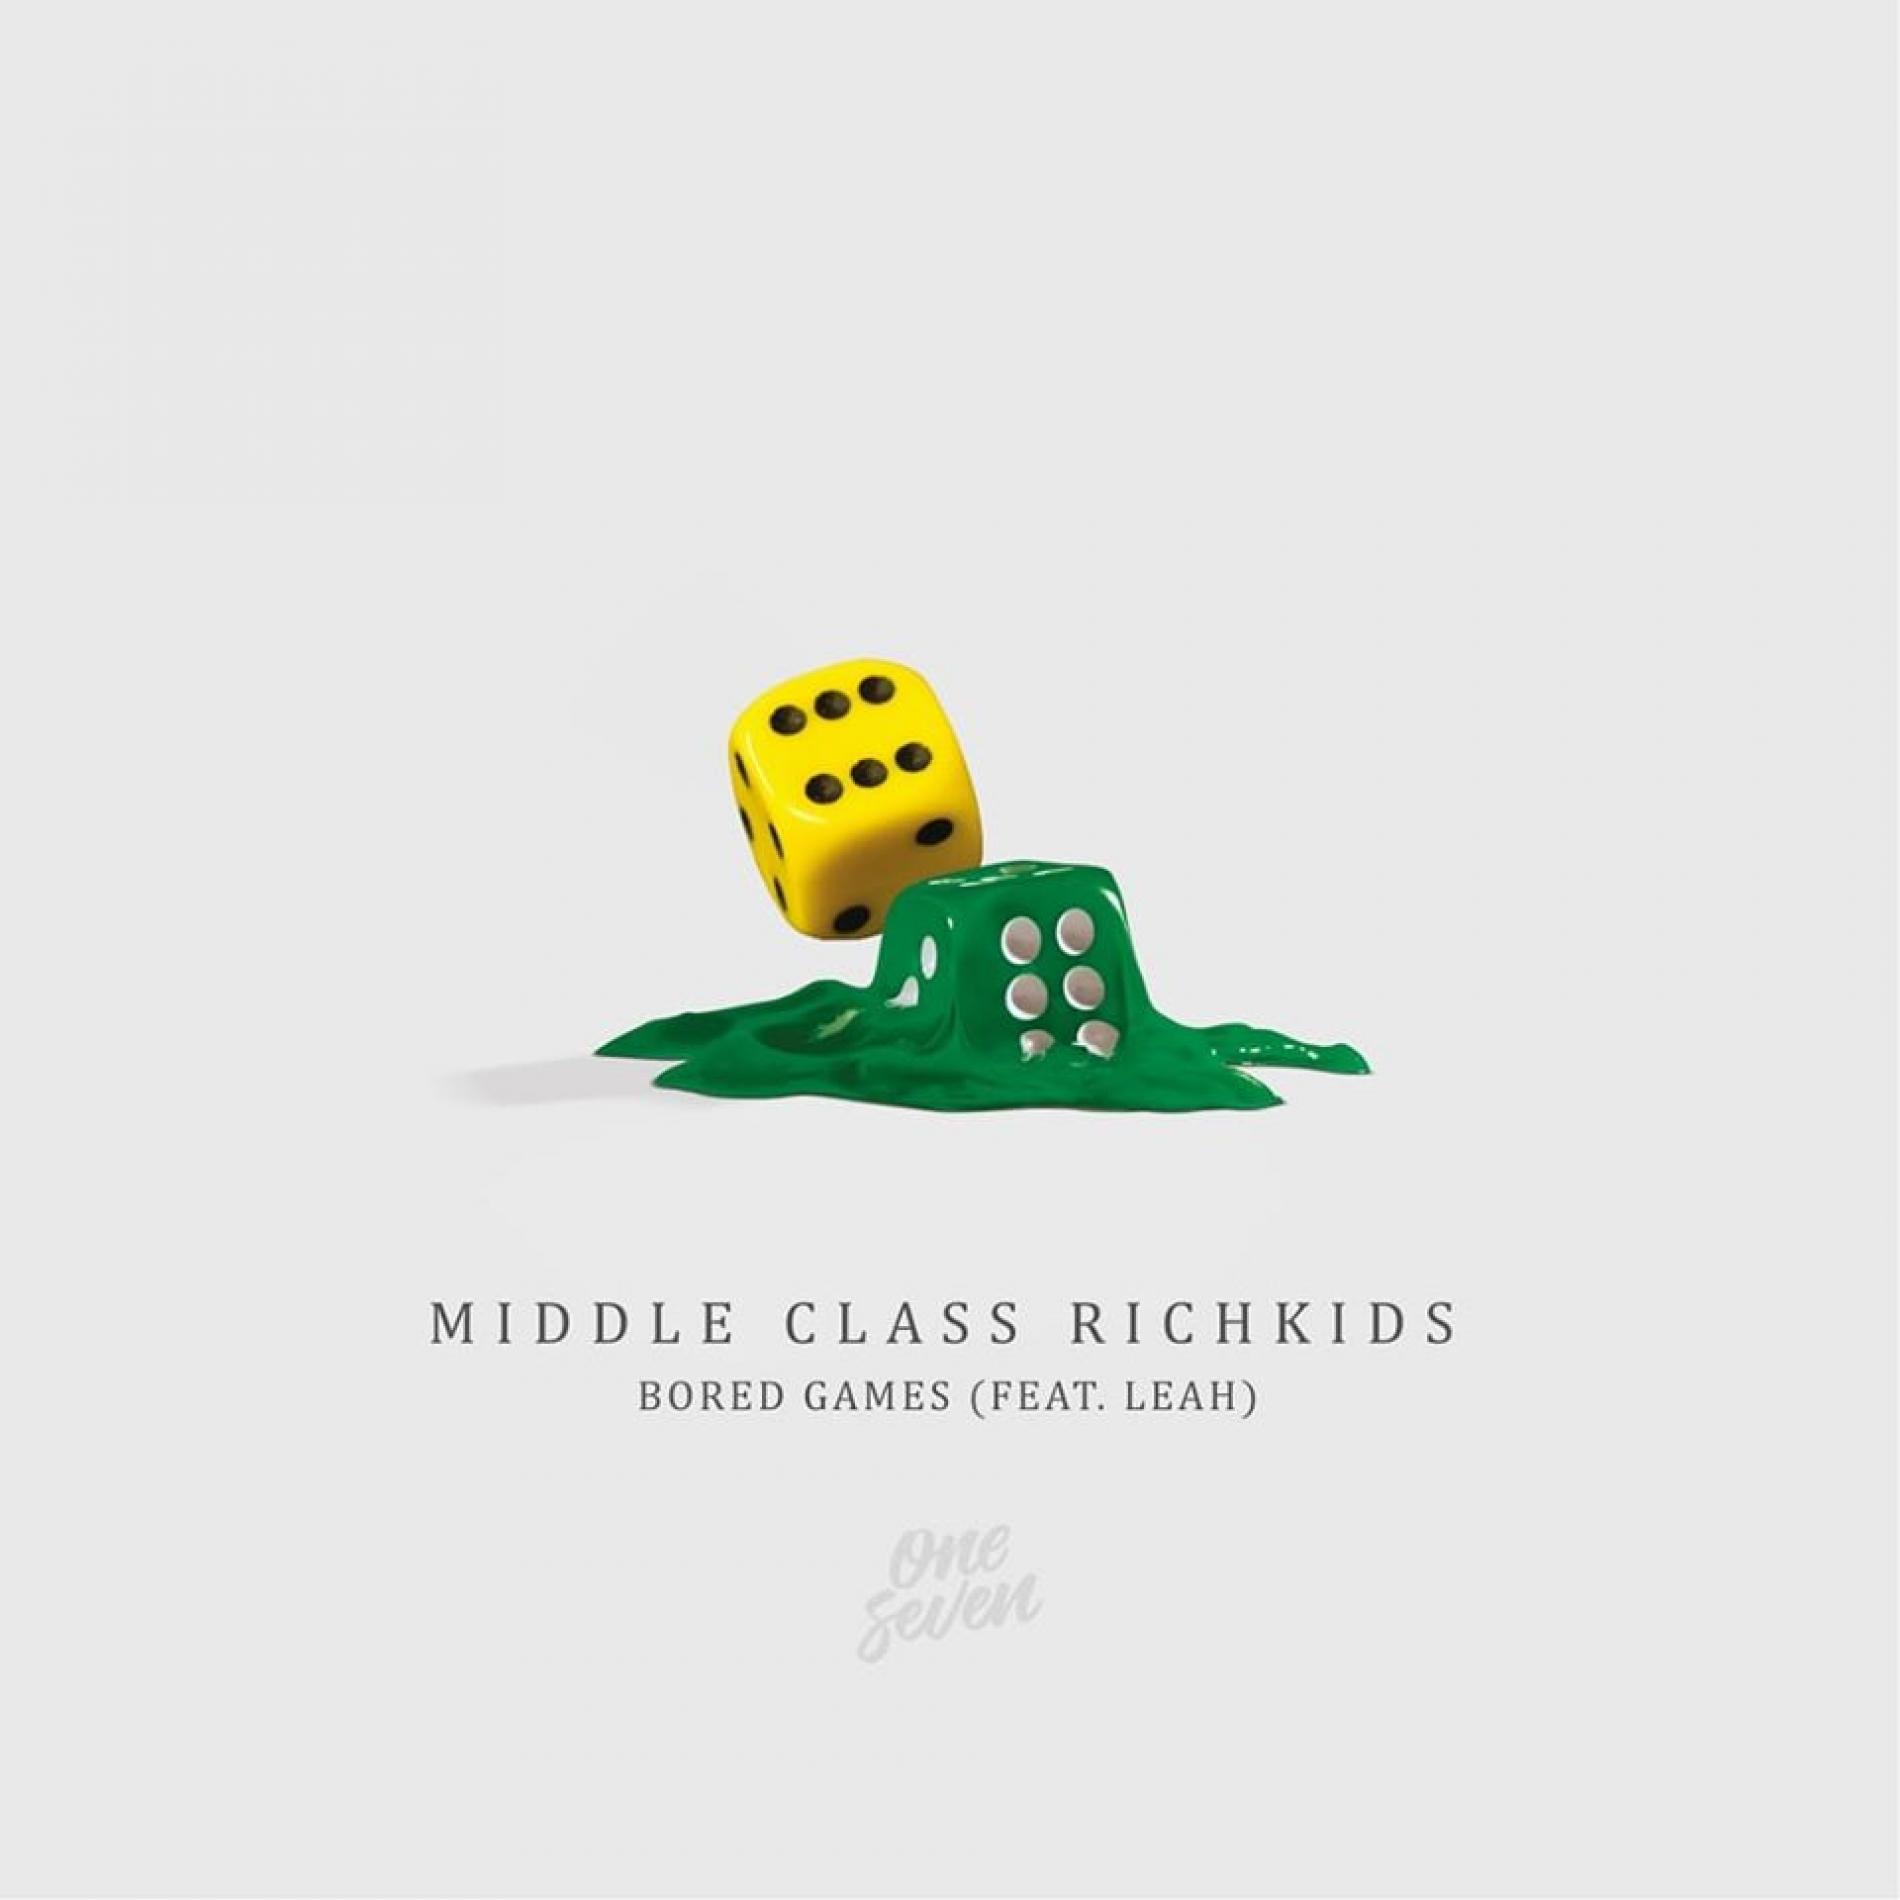 Middle Class Rich Kids Have Track 2 Dropping Soon!